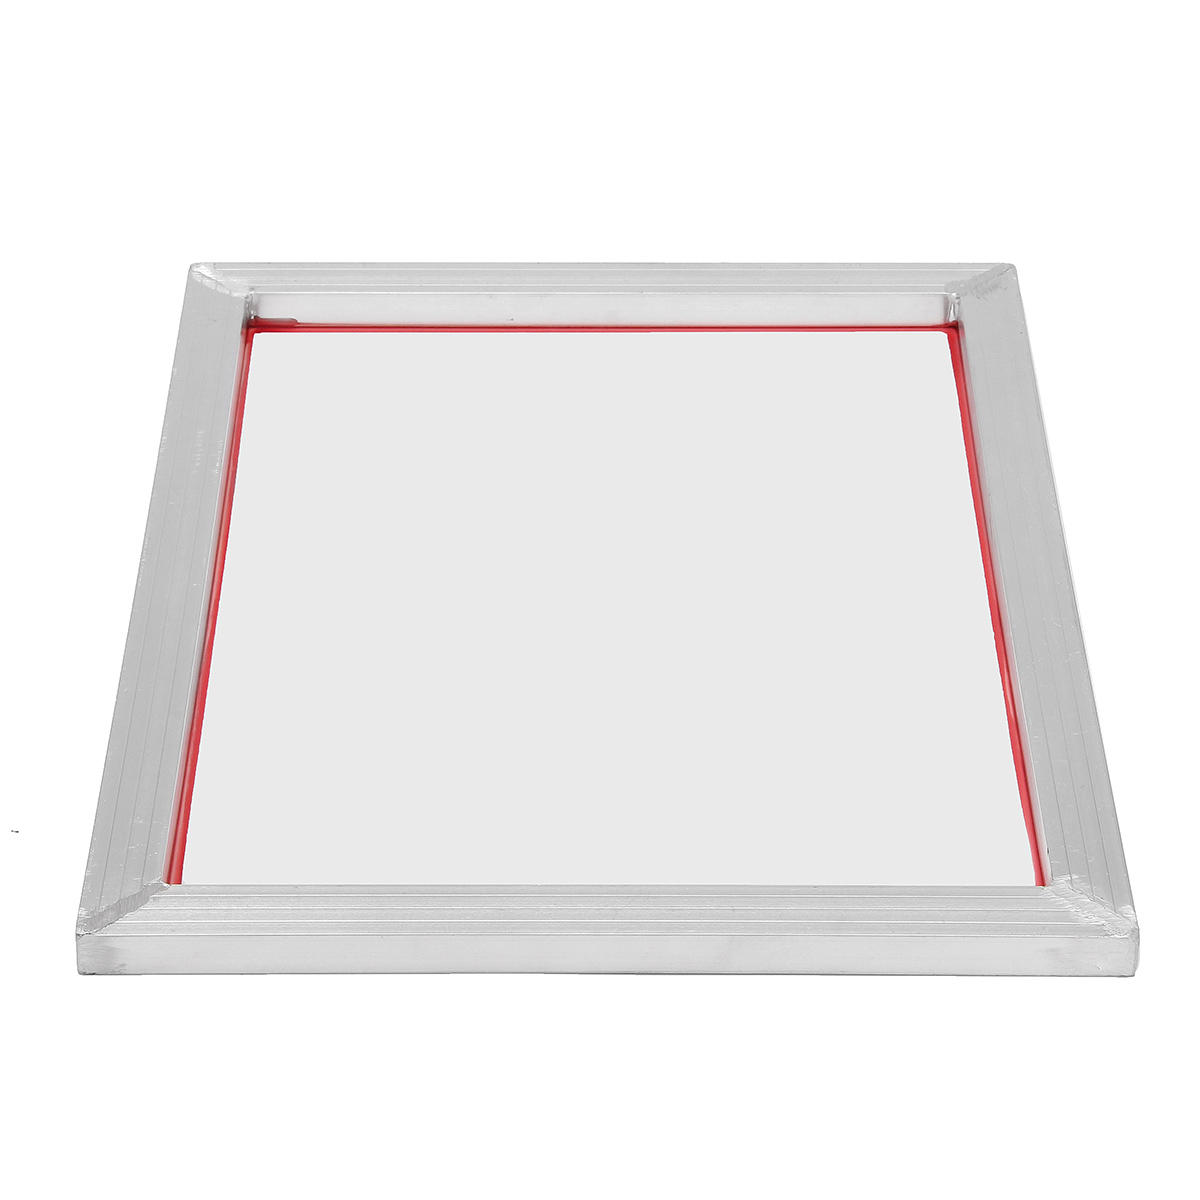 A3 Screen Printing Aluminium Frame Stretched With White 77T Silk Print Mesh